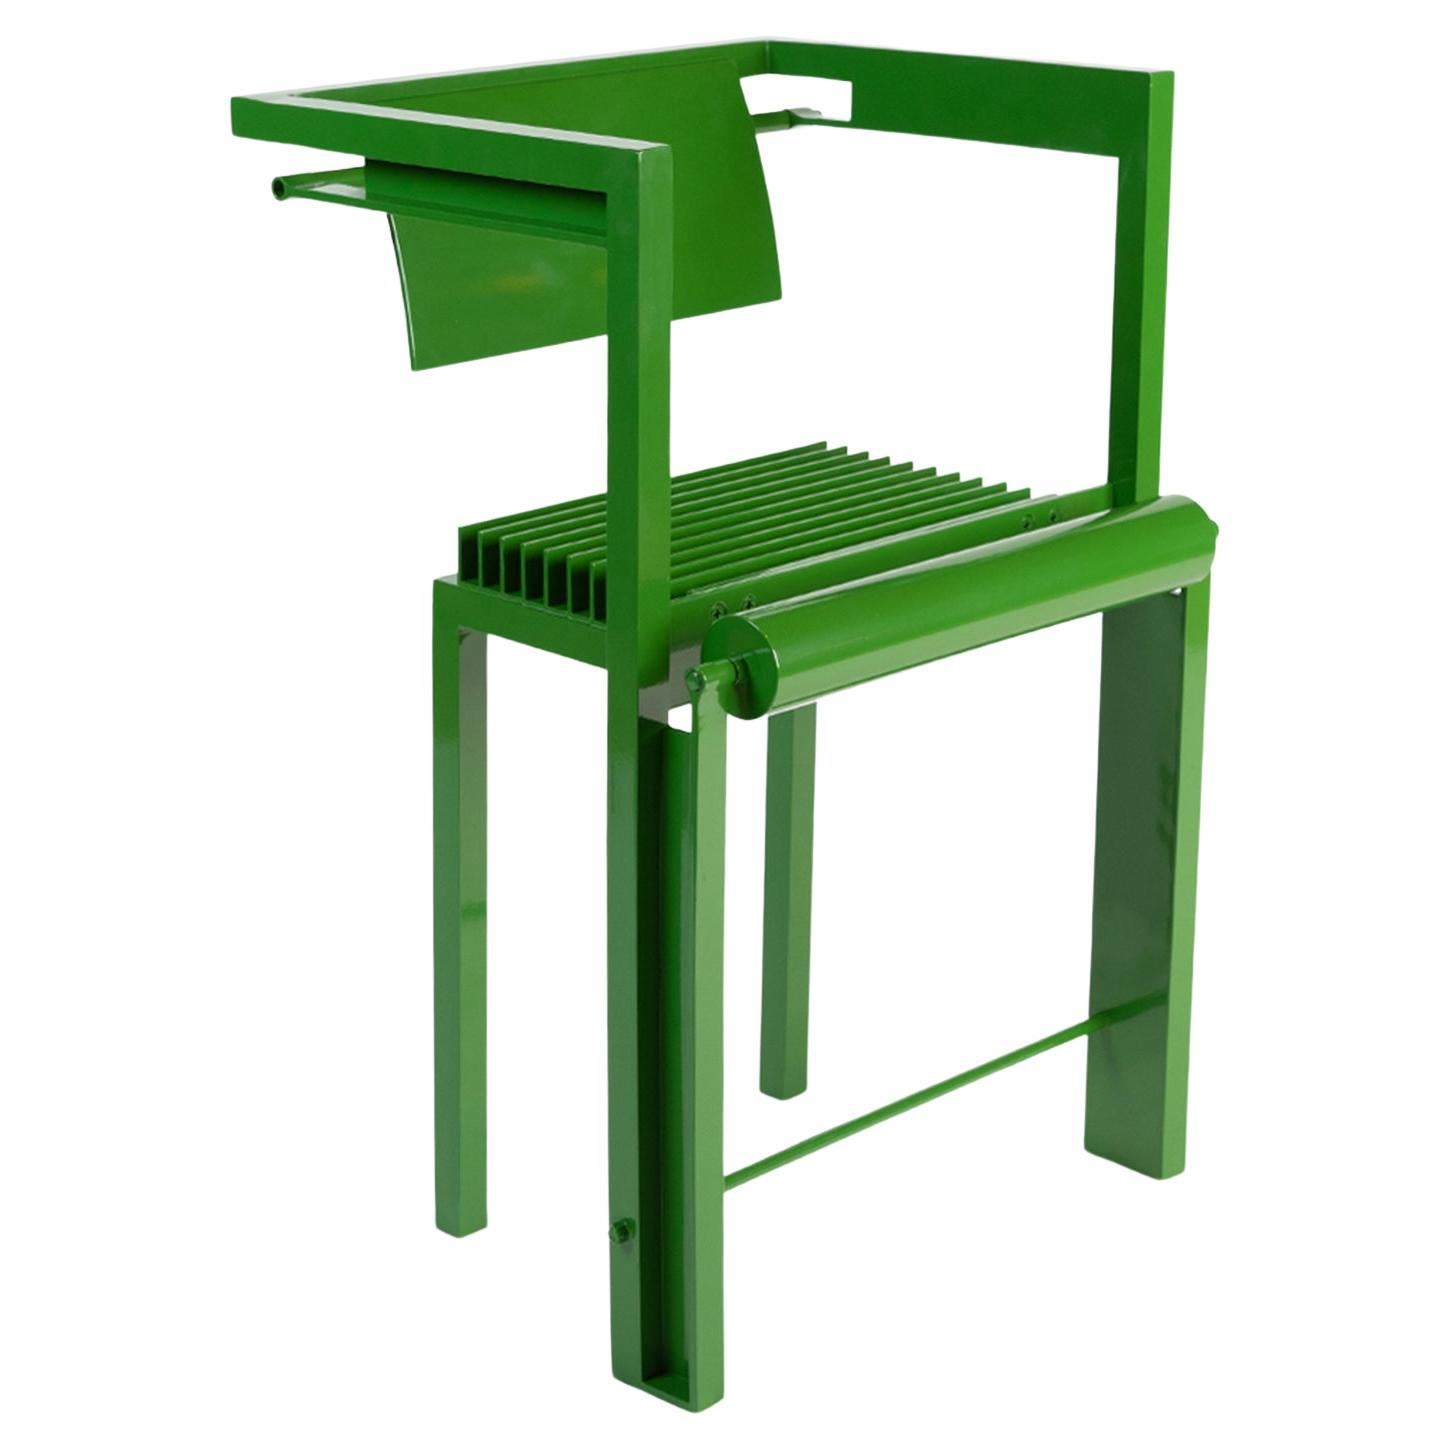 Robert Whitton Architectural One-Off Chair in Green For Sale